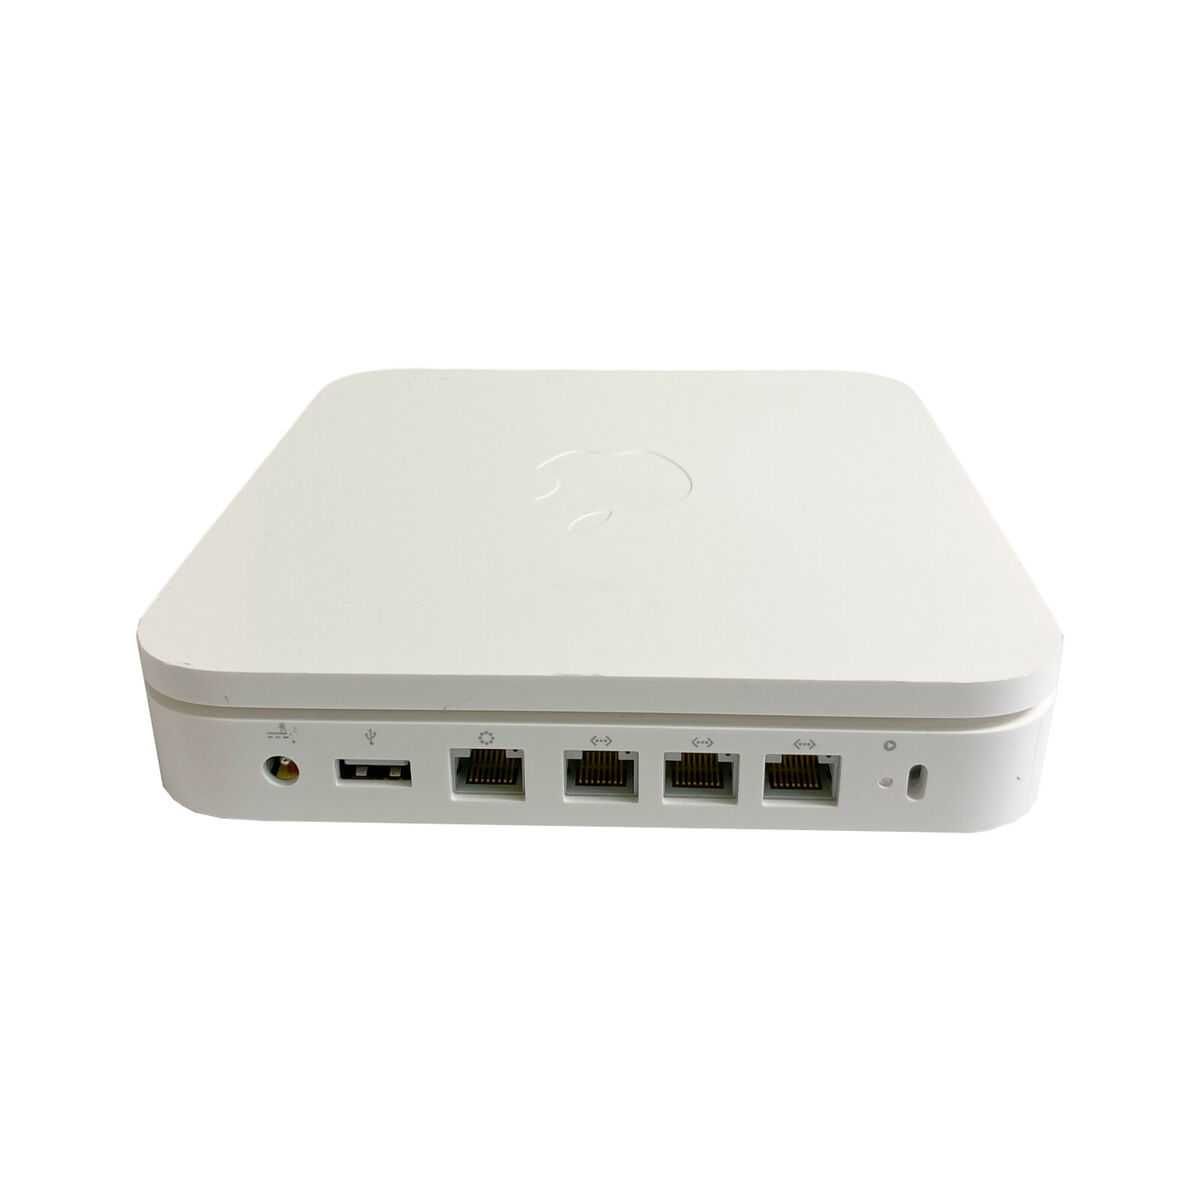 Apple A1354 Router Wireless AirPort Extreme Base Station 4th gen